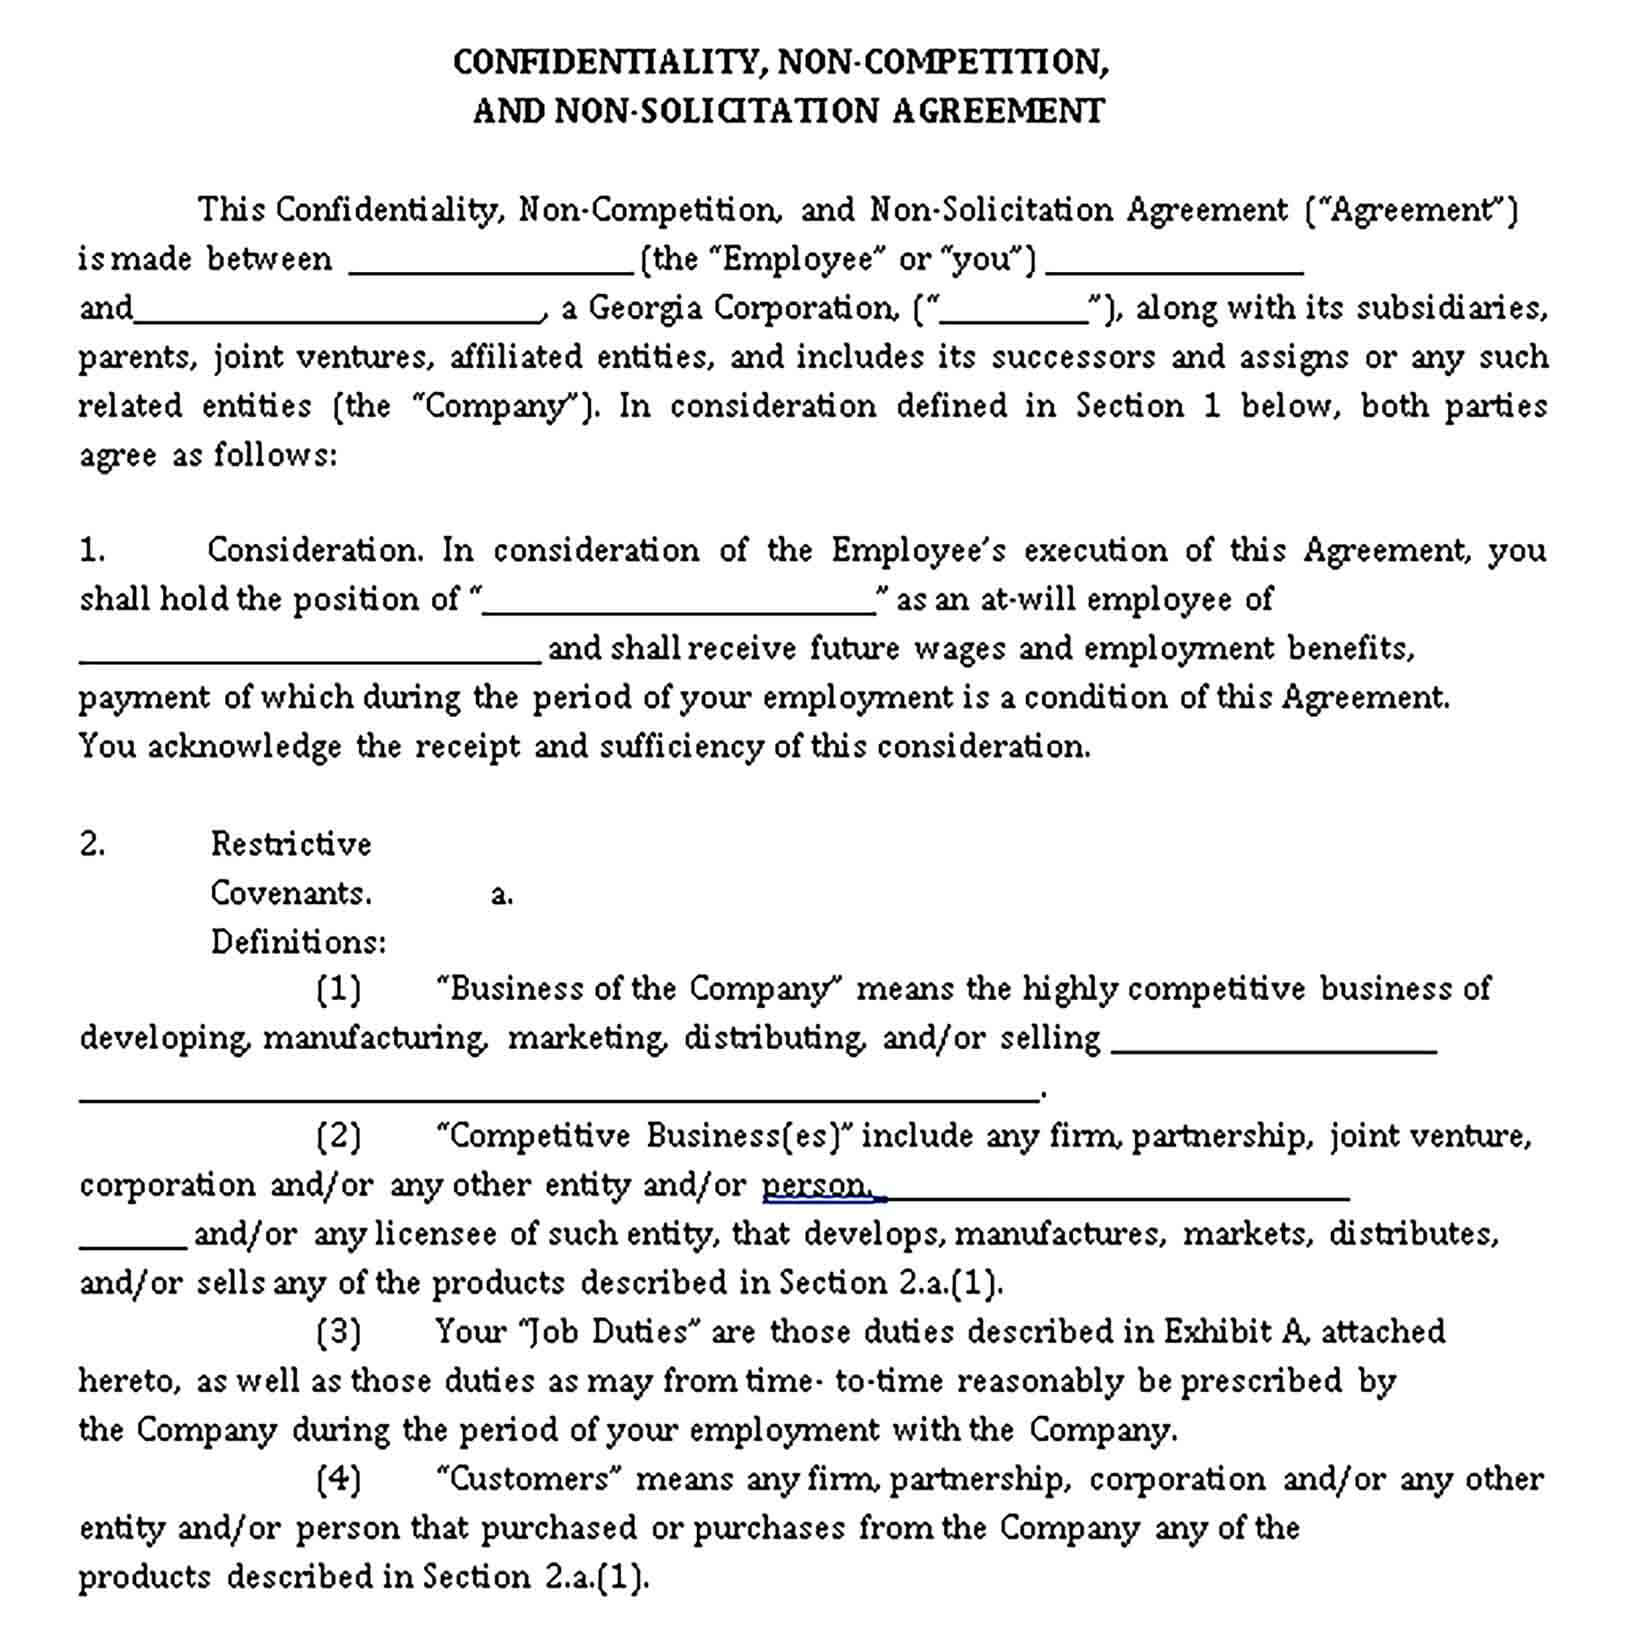 Templates Restaurant Confidentiality Non Compete and Non Solicitation Agreement Sample